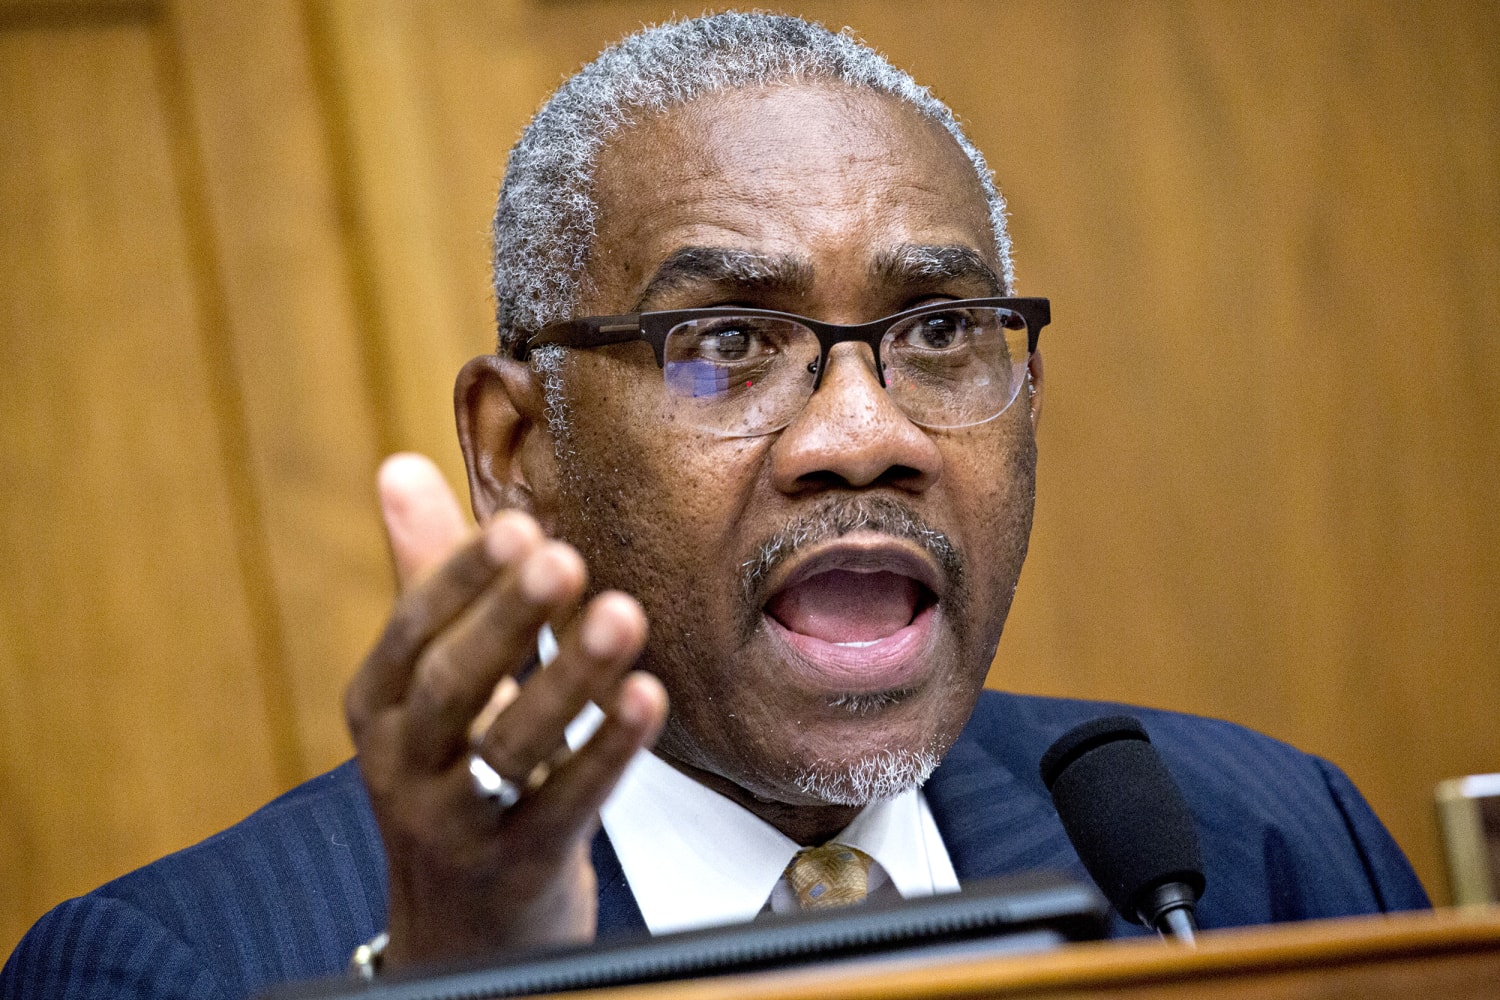 Gregory Meeks to become first Black American to chair House Foreign Affairs Committee